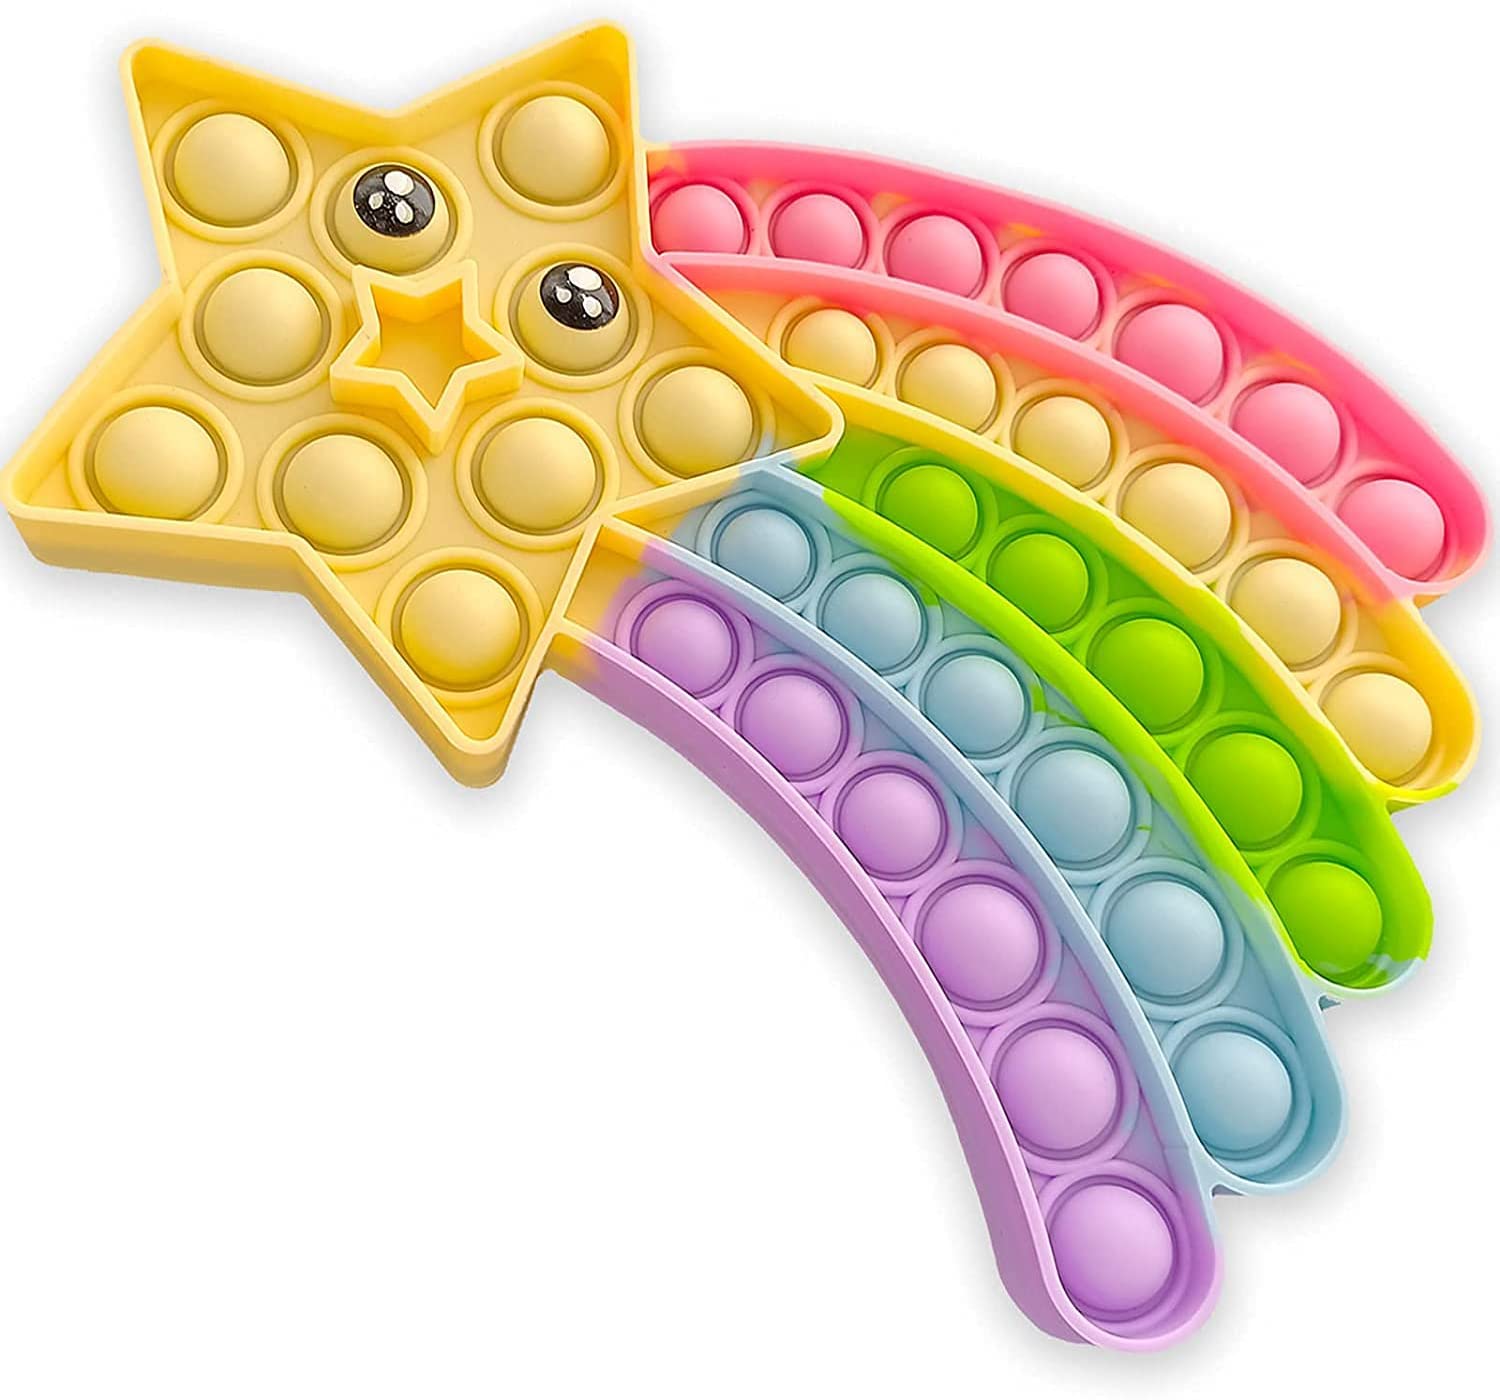 Push Popper Speelgoed Peuters Squeeze Ster Siliconen Speelgoed Duurzaam Squishy Verlicht Angst Games Voor Autisme Anti-Stress Squeeze Bubble